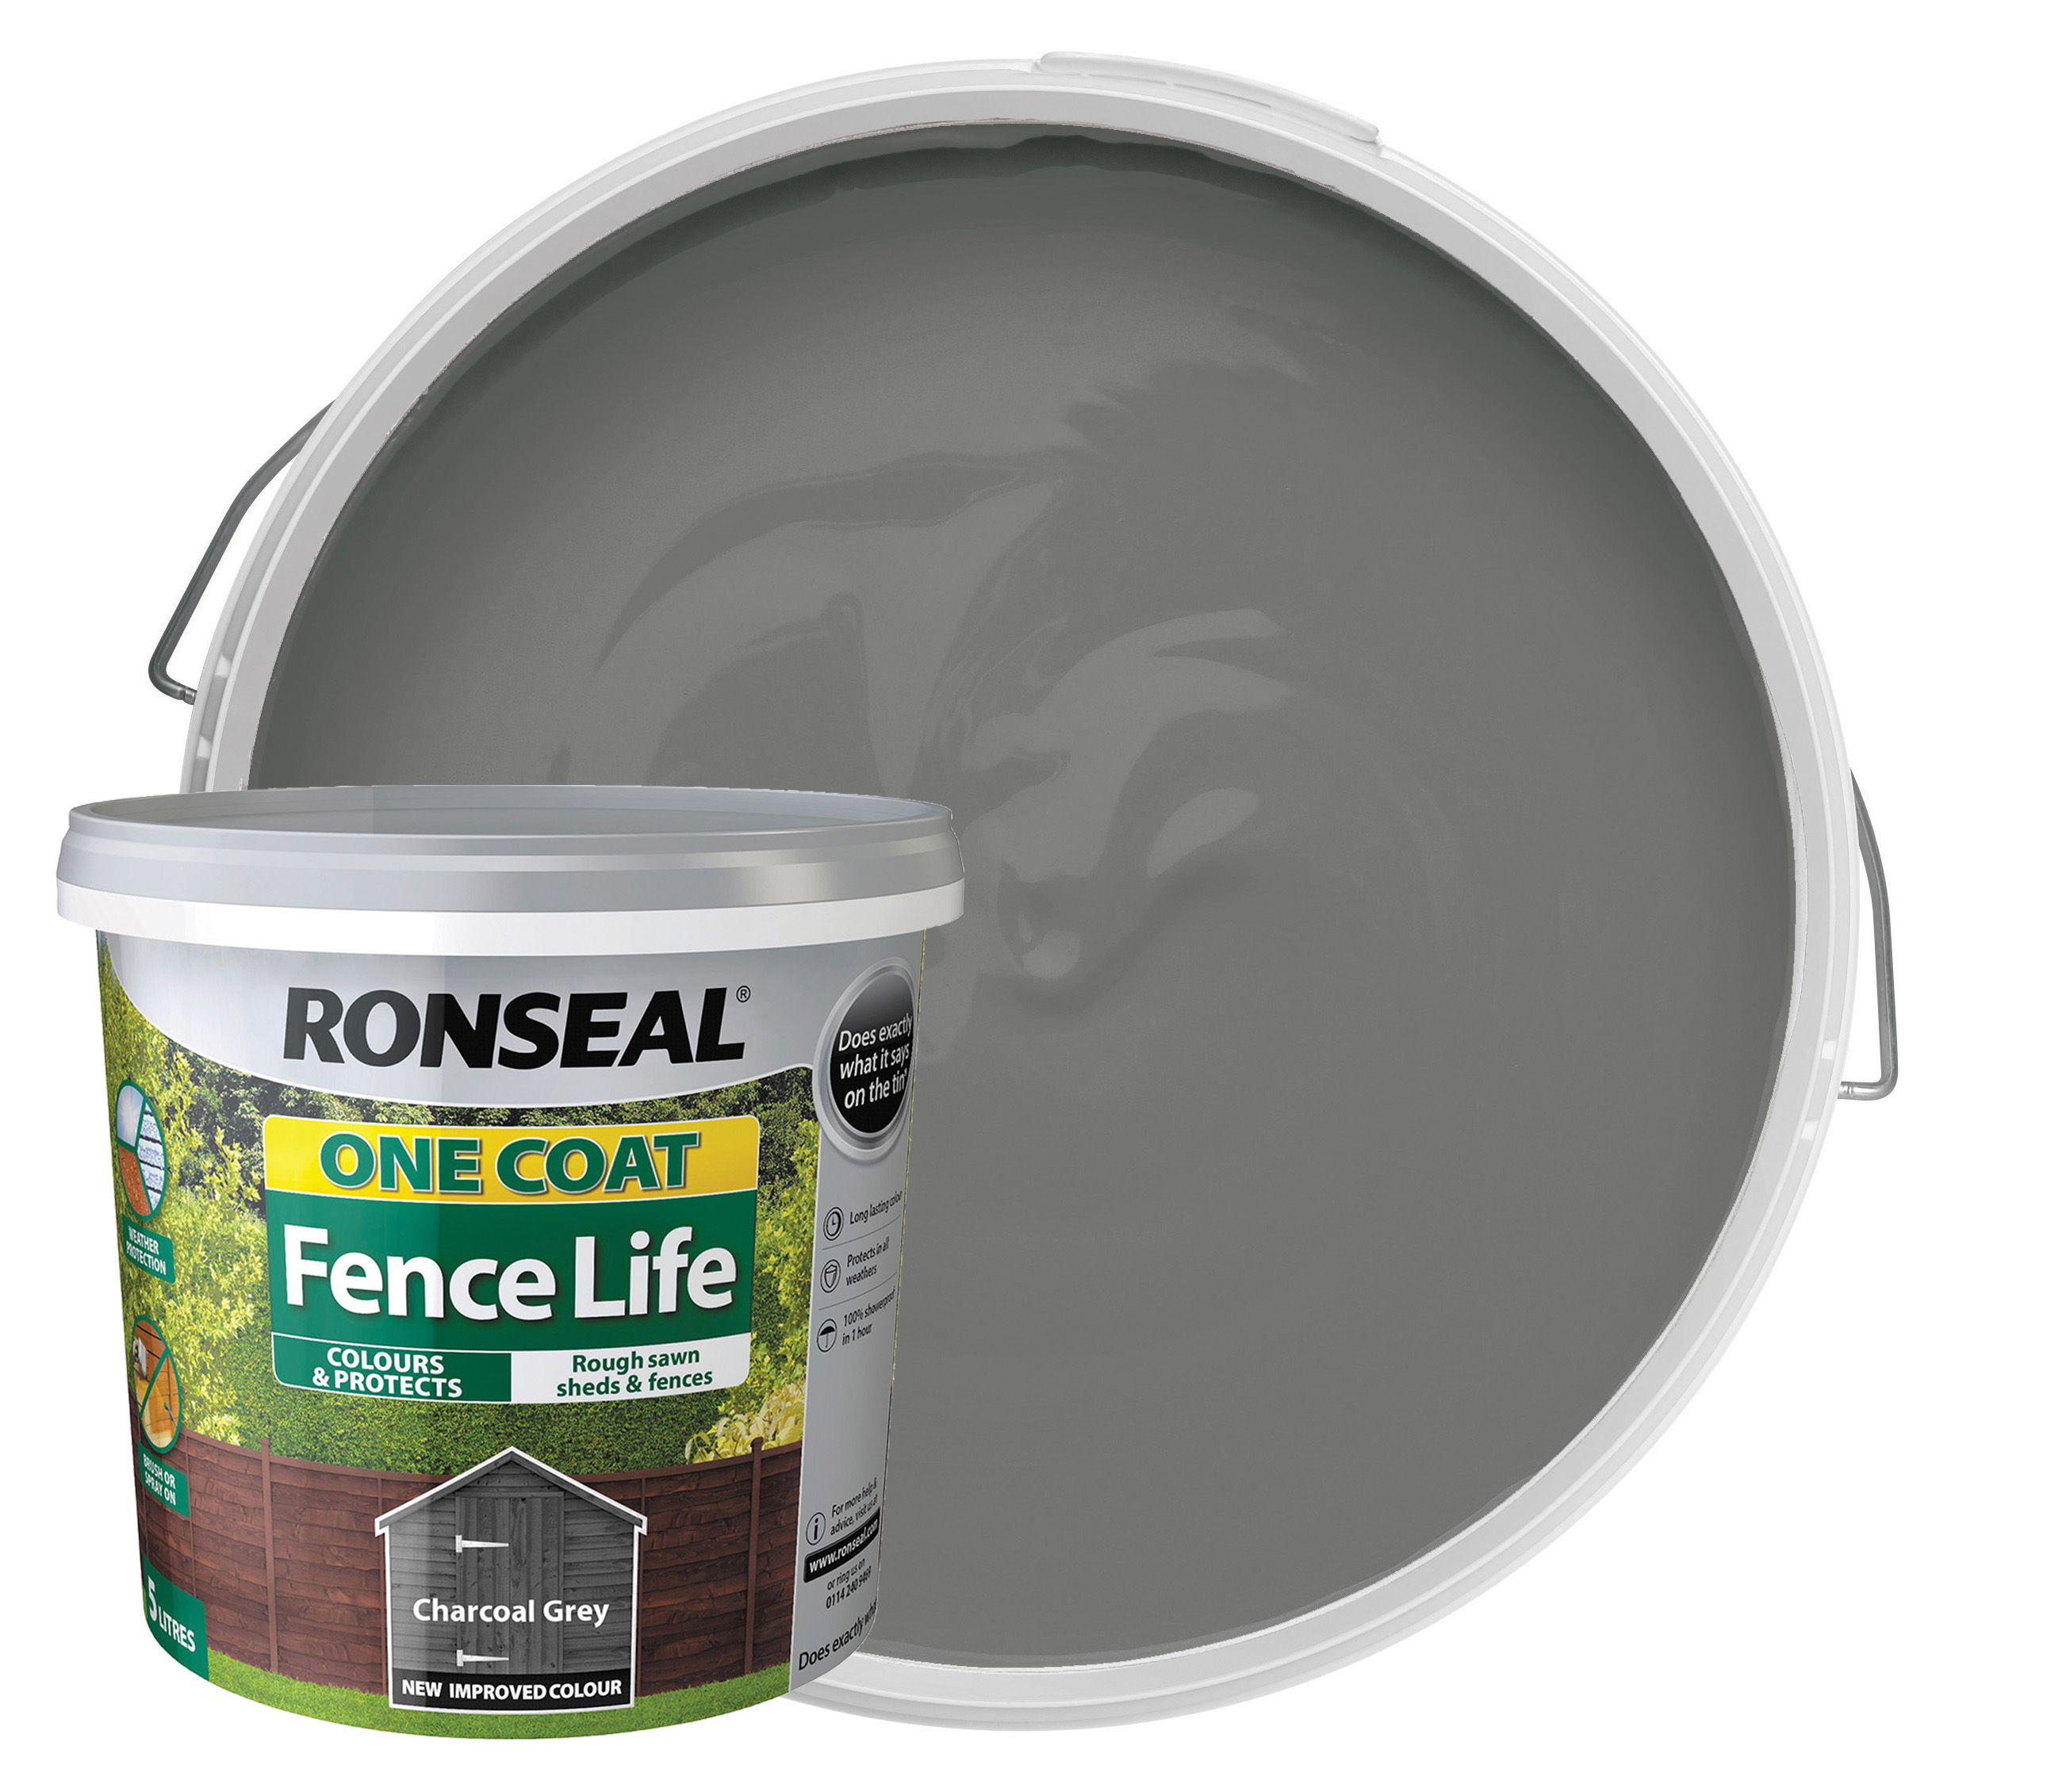 Ronseal One Coat Fence Life Matt Shed & Fence Treatment - Charcoal Grey - 5L